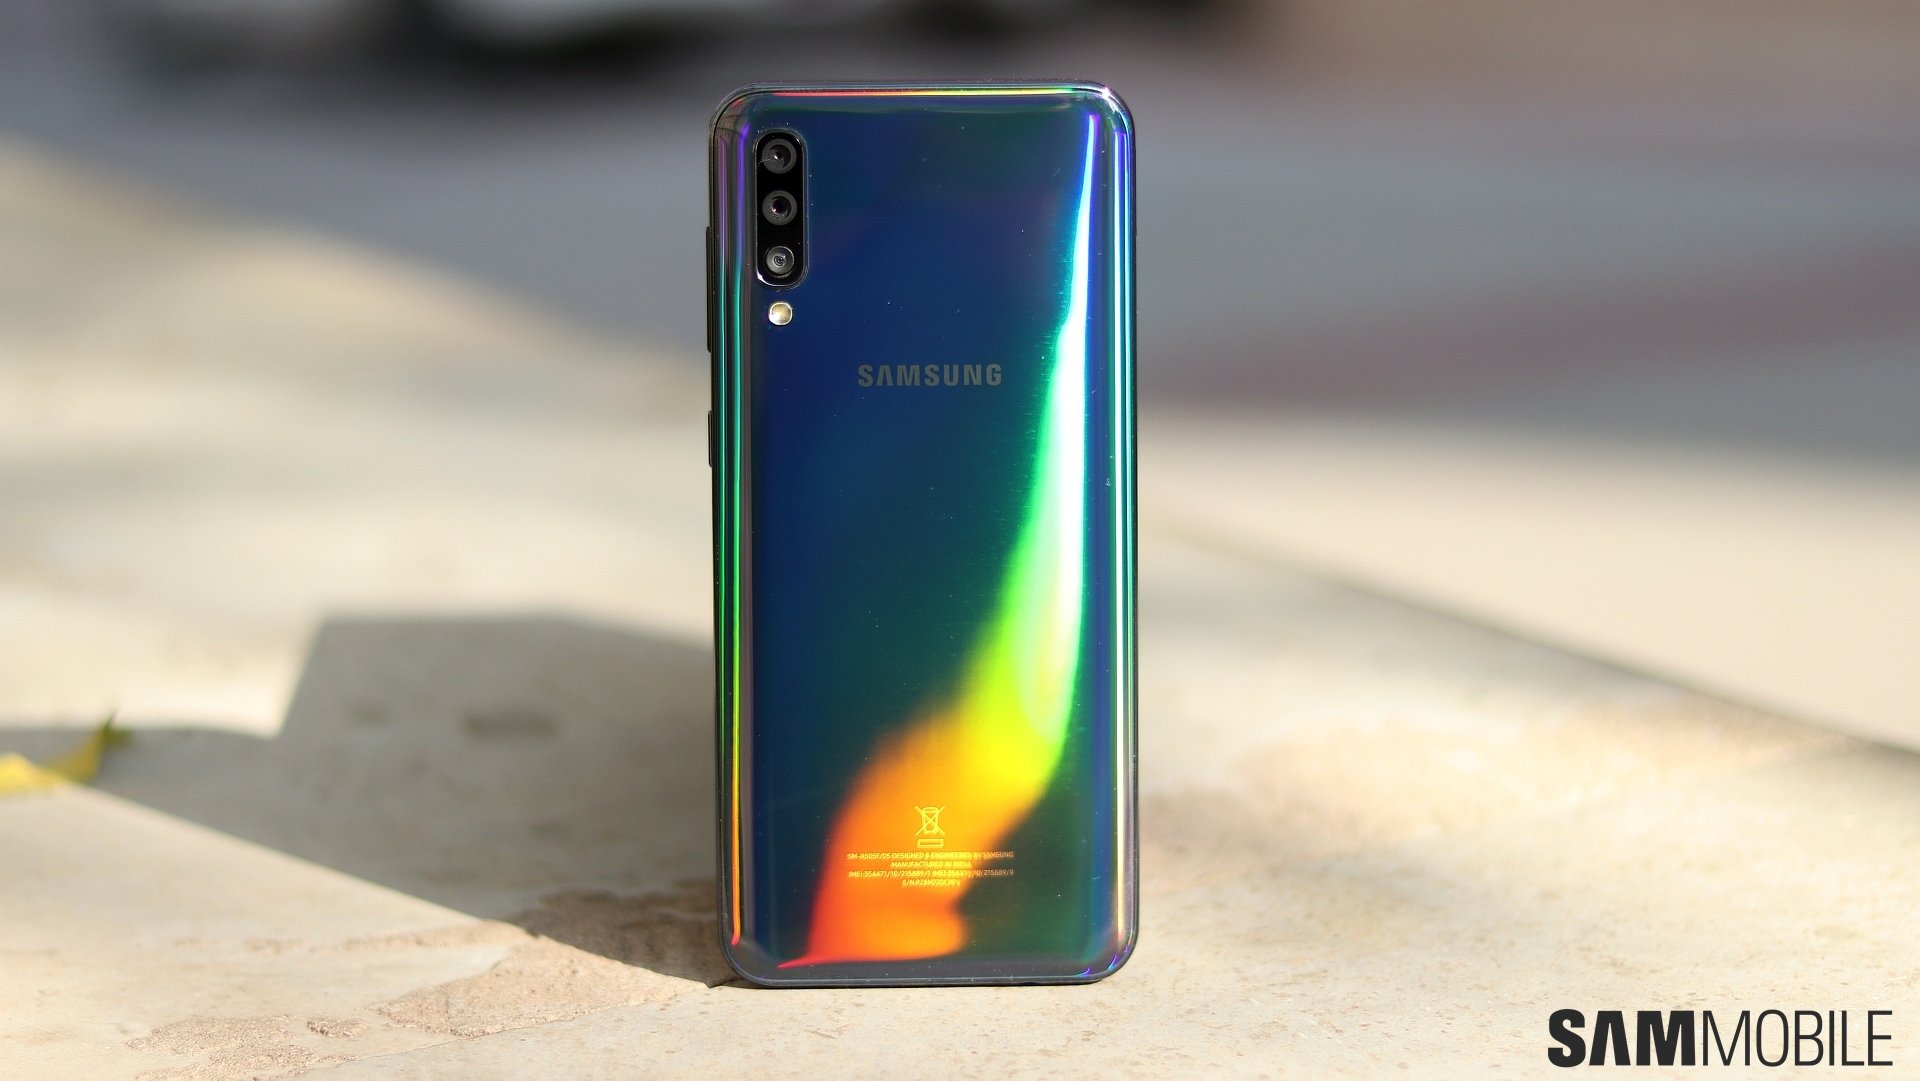 Galaxy A50 review: Samsung's mid-ranger yet - SamMobile